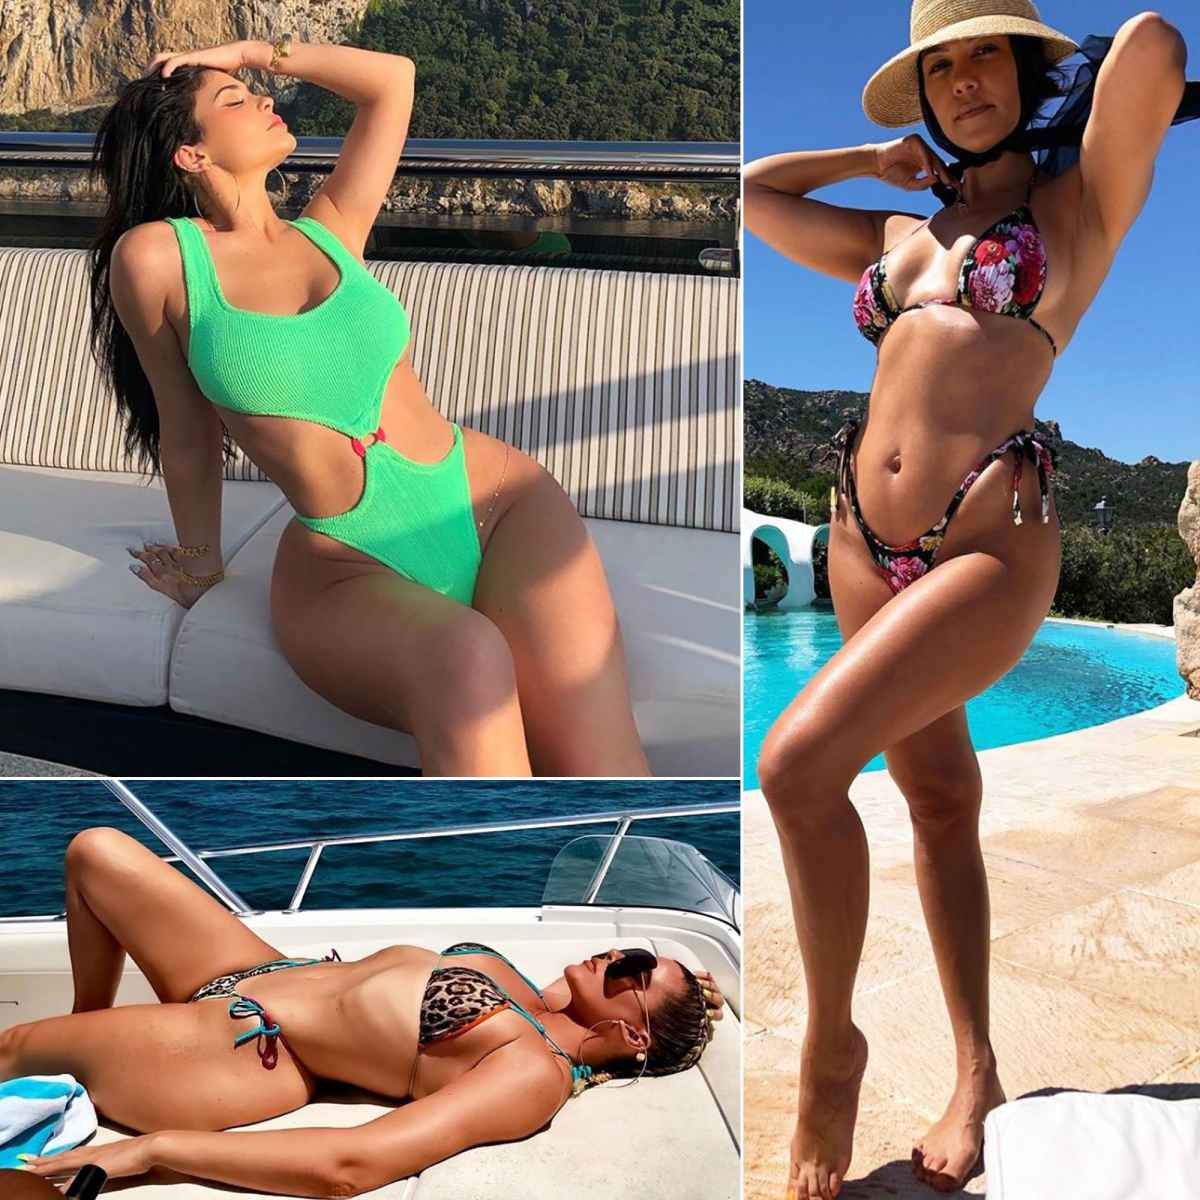 Kylie Jenner's Swimsuits on Tropical Holiday Feb. 2020